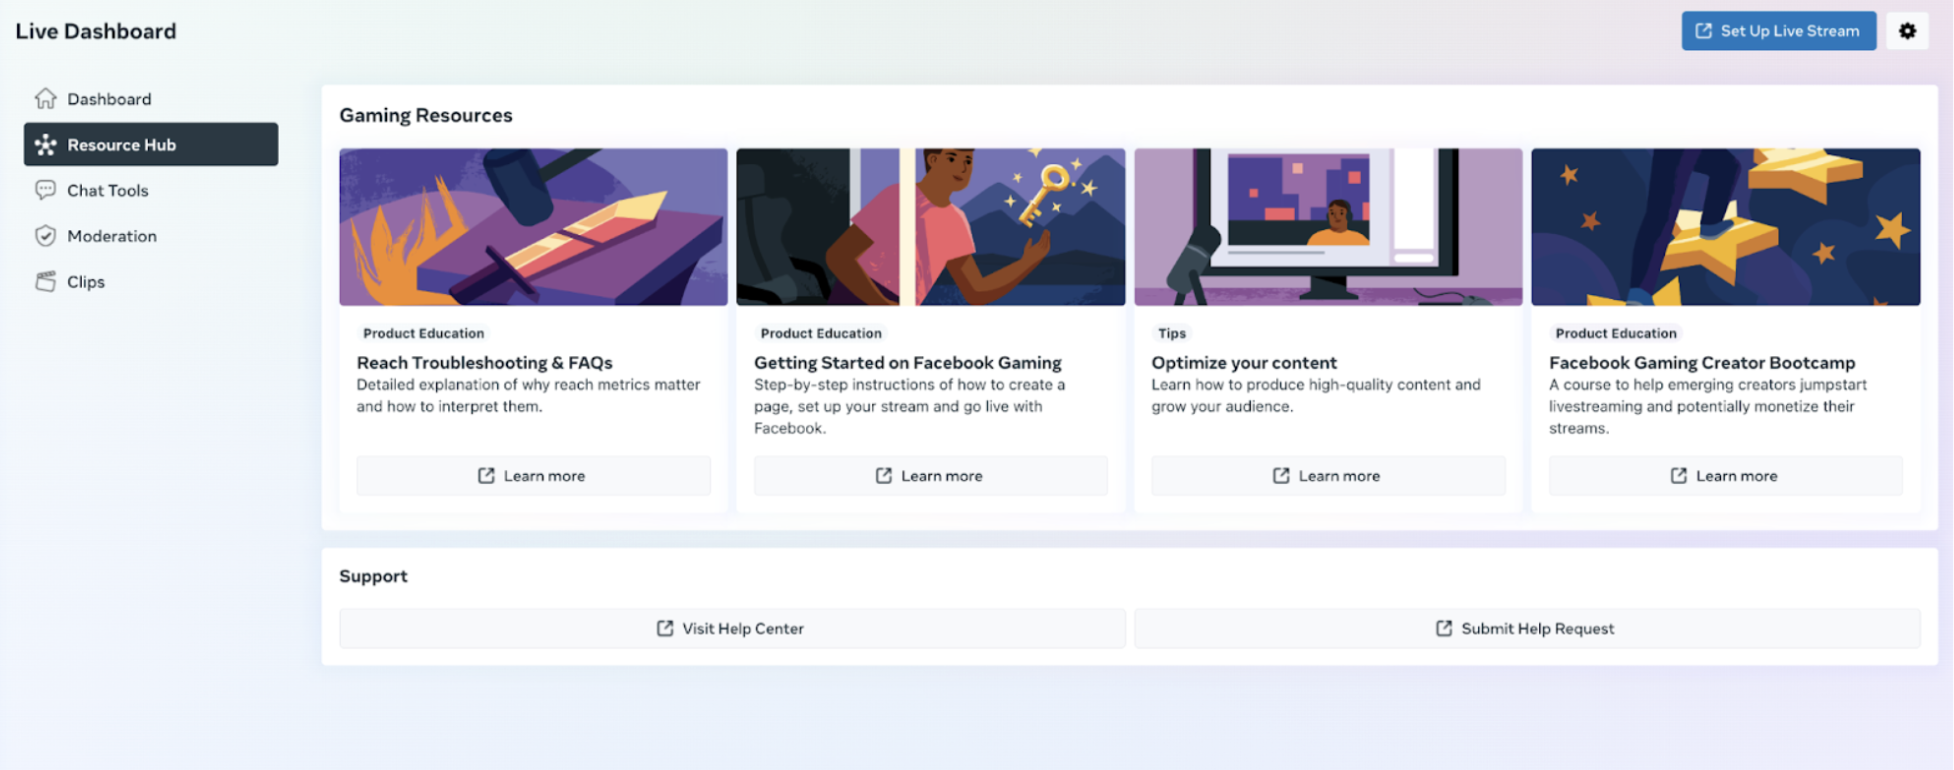 Preview of the Live Dashboard's Resource Hub in Creator Studio. The image shows gaming resources such as getting started on Facebook gaming and optimizing your content. It also shows the Support tab with options to visit the help center and submit a help request. 